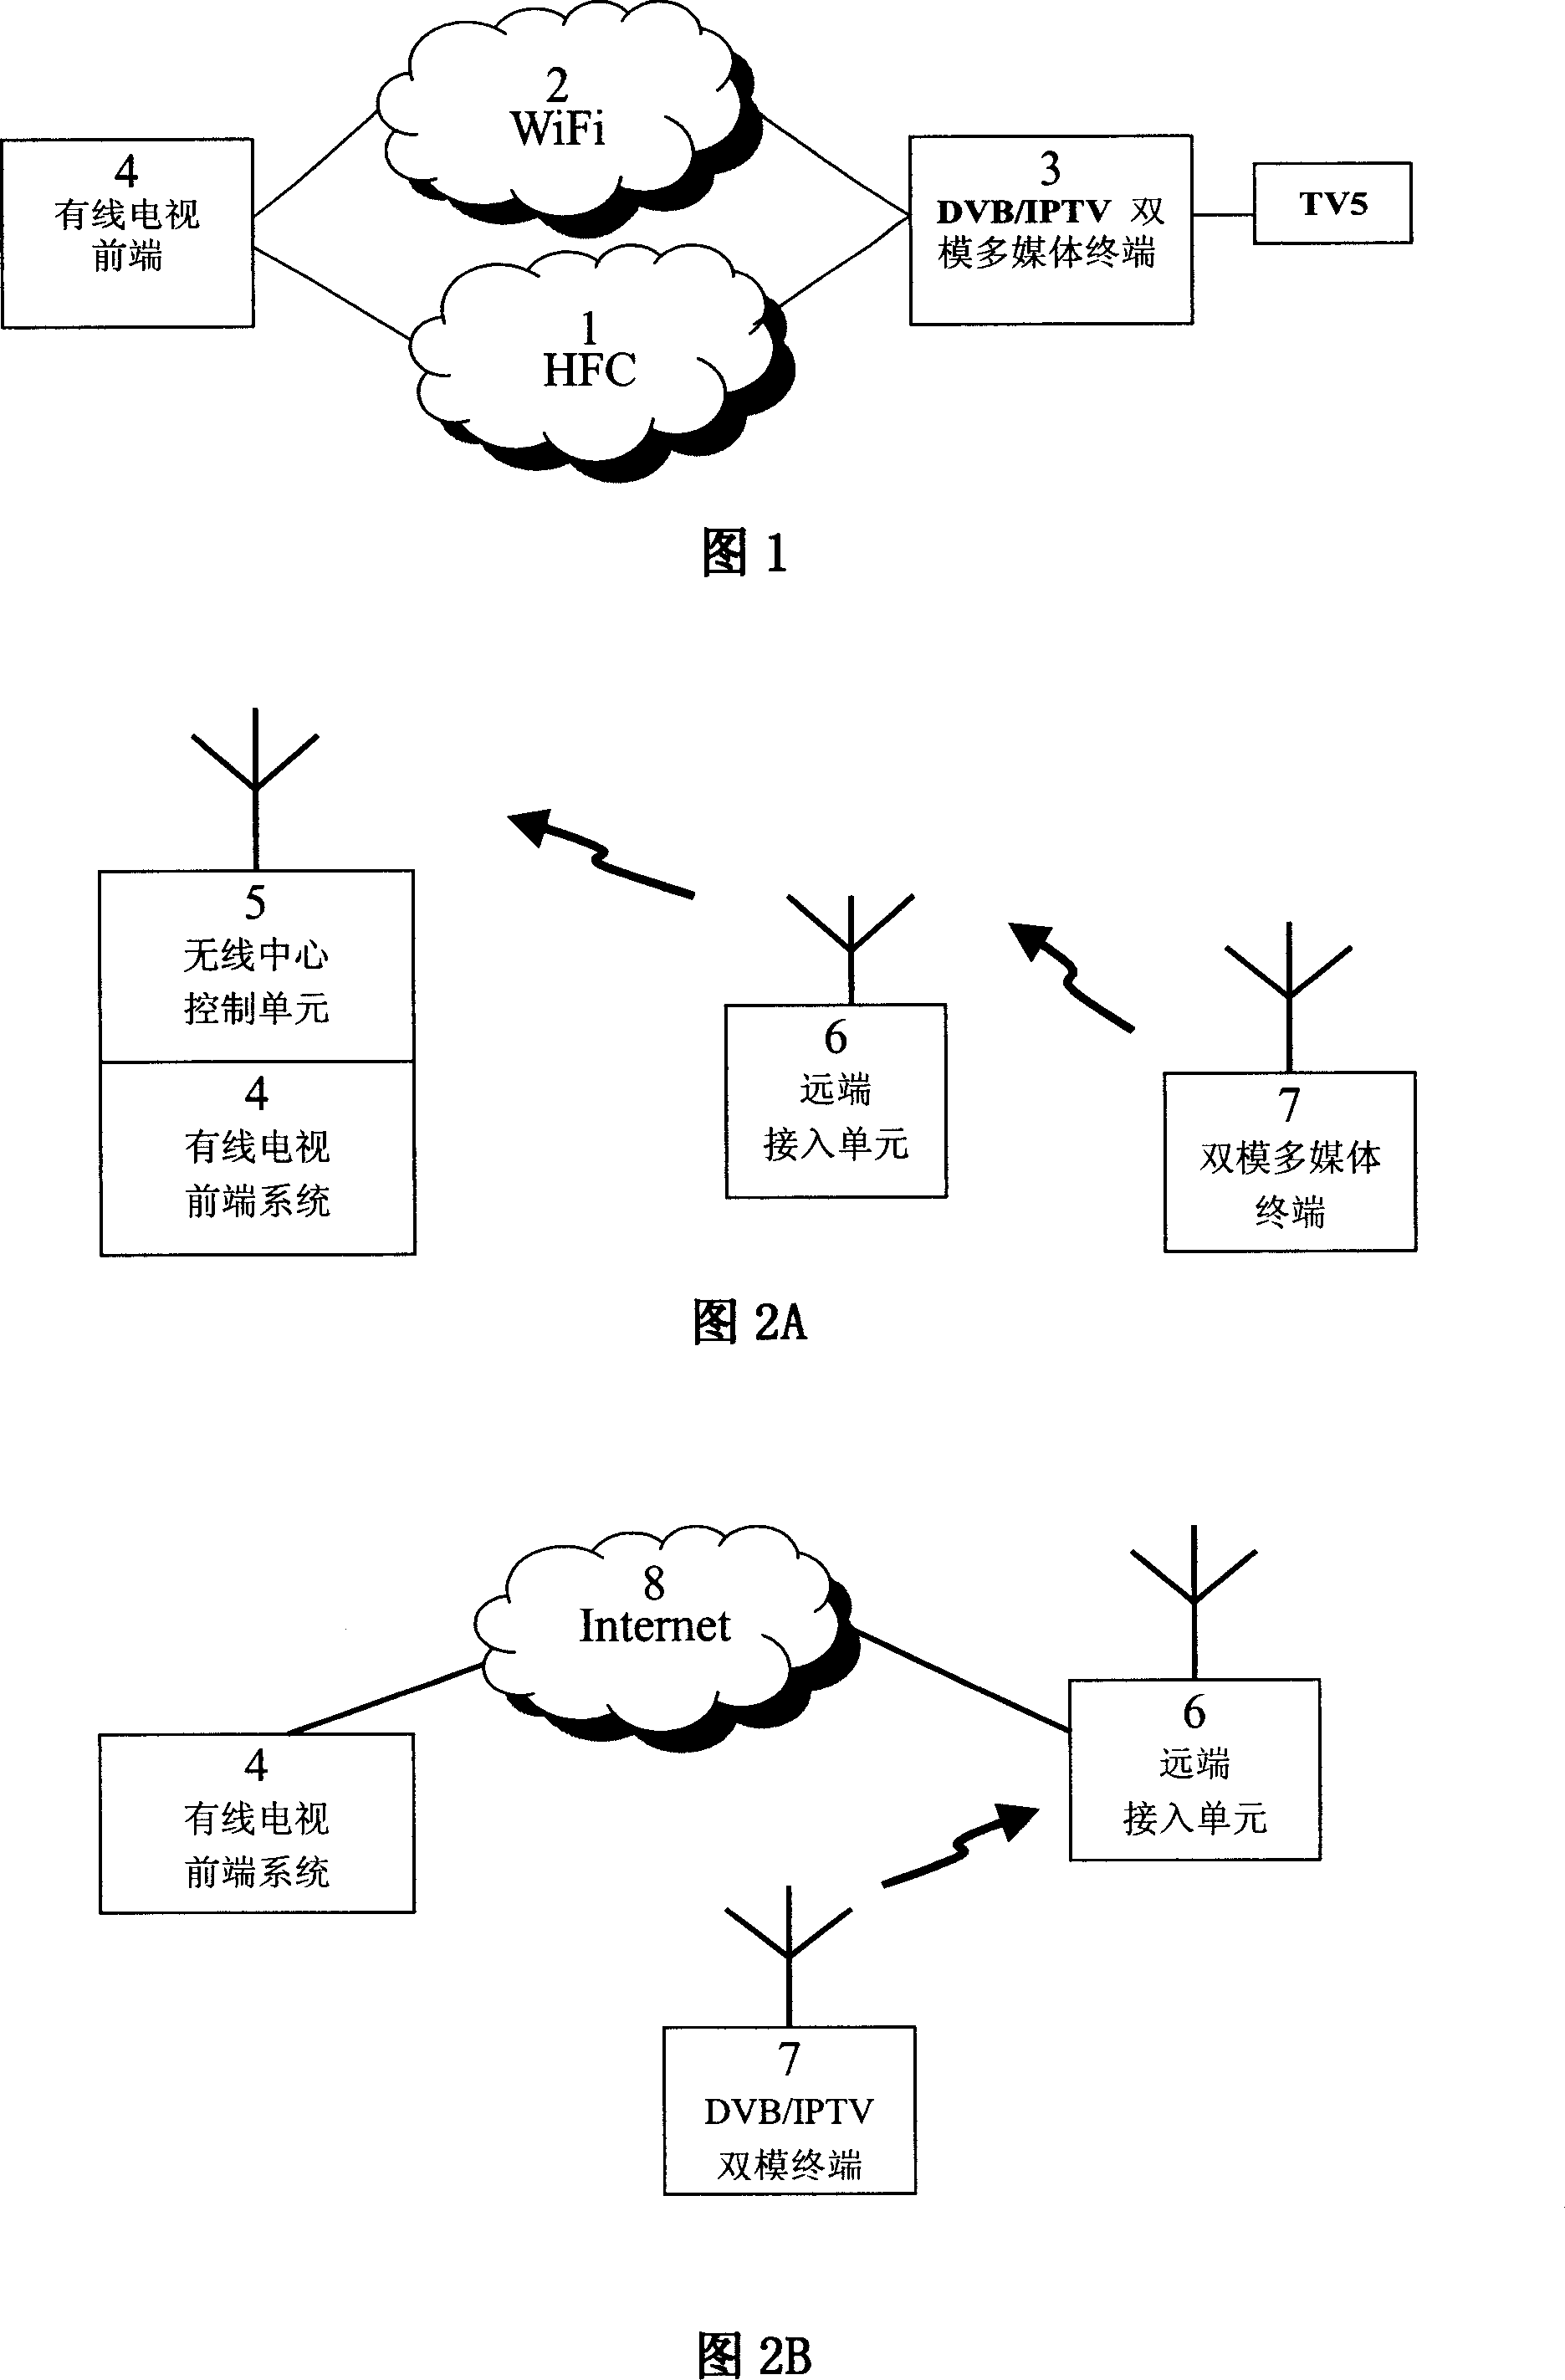 Method and system for reforming digital cable television broadband network into two-way